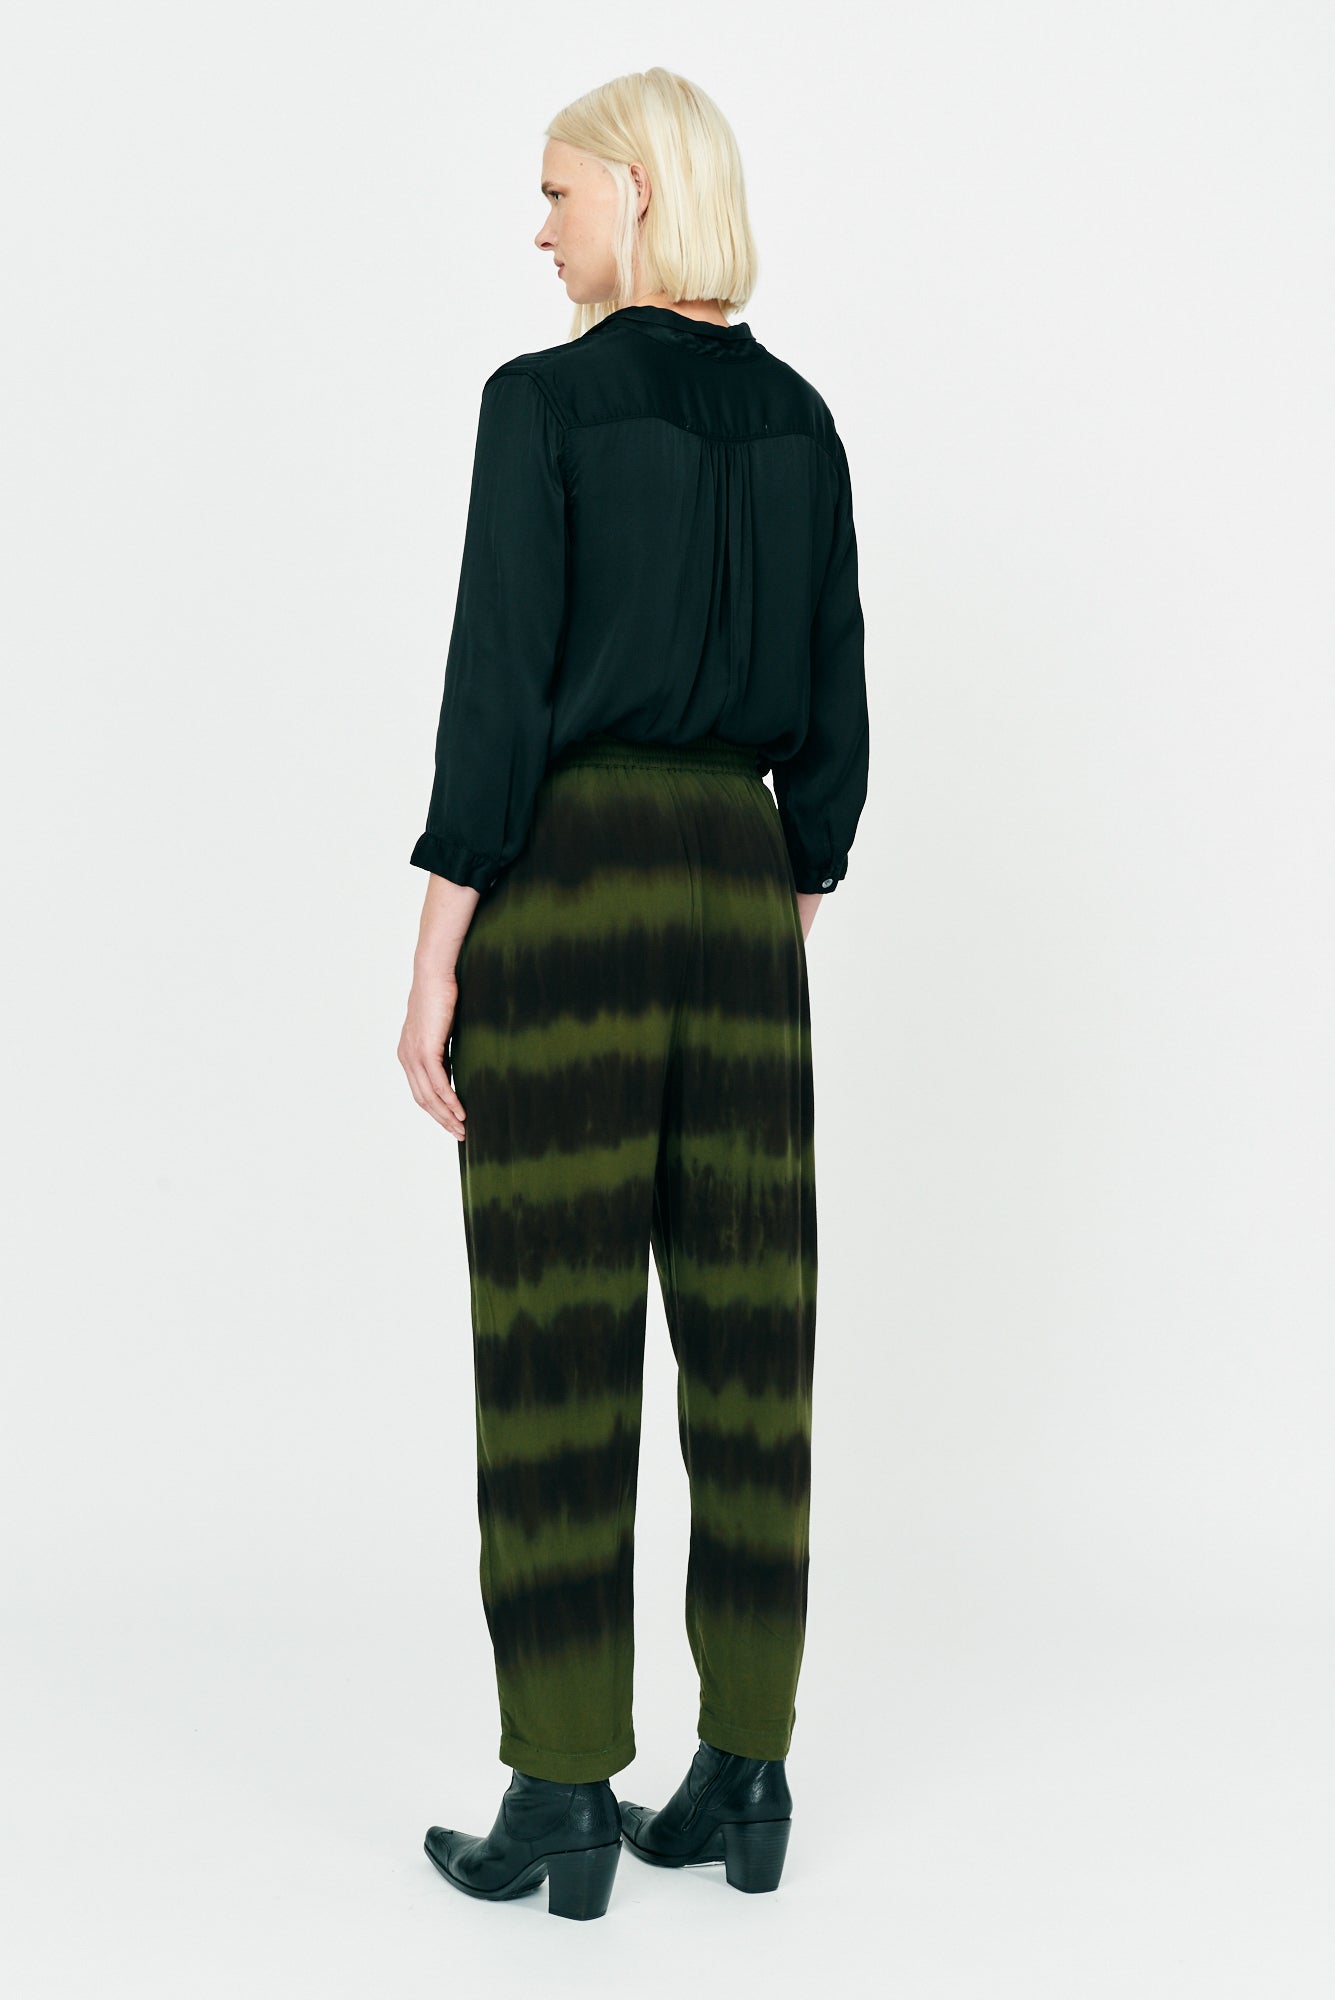 Forest Black and Stripes Tie Dye Ghost Ranch Soft Twill Sunday Pant Full Back View